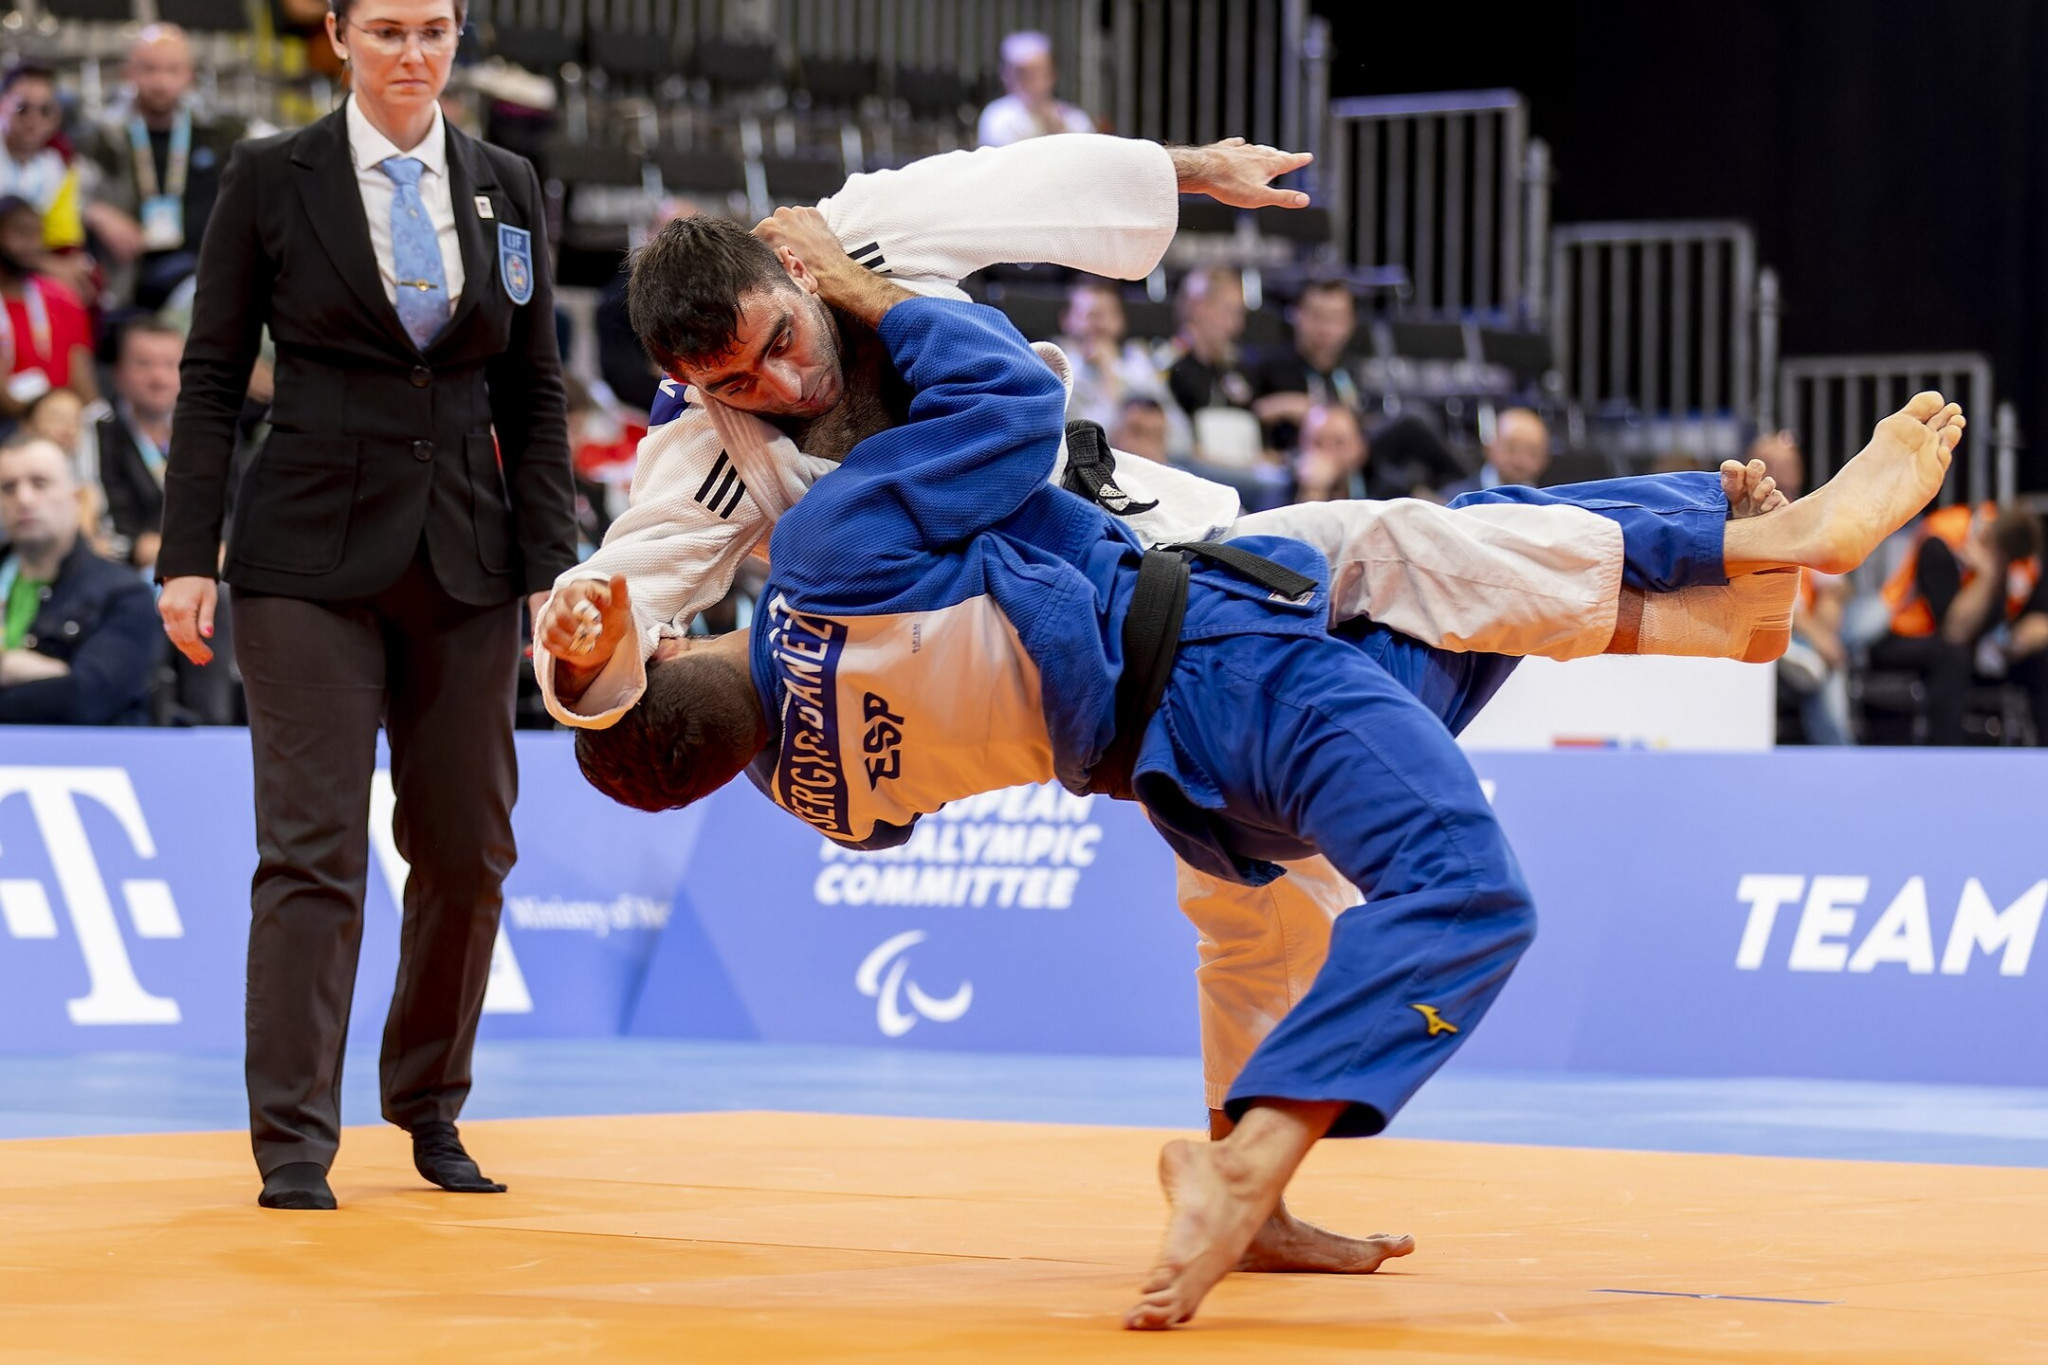 The first day of competition at the European Para Championships delivered a series of terrific Para judo matches ©EPC